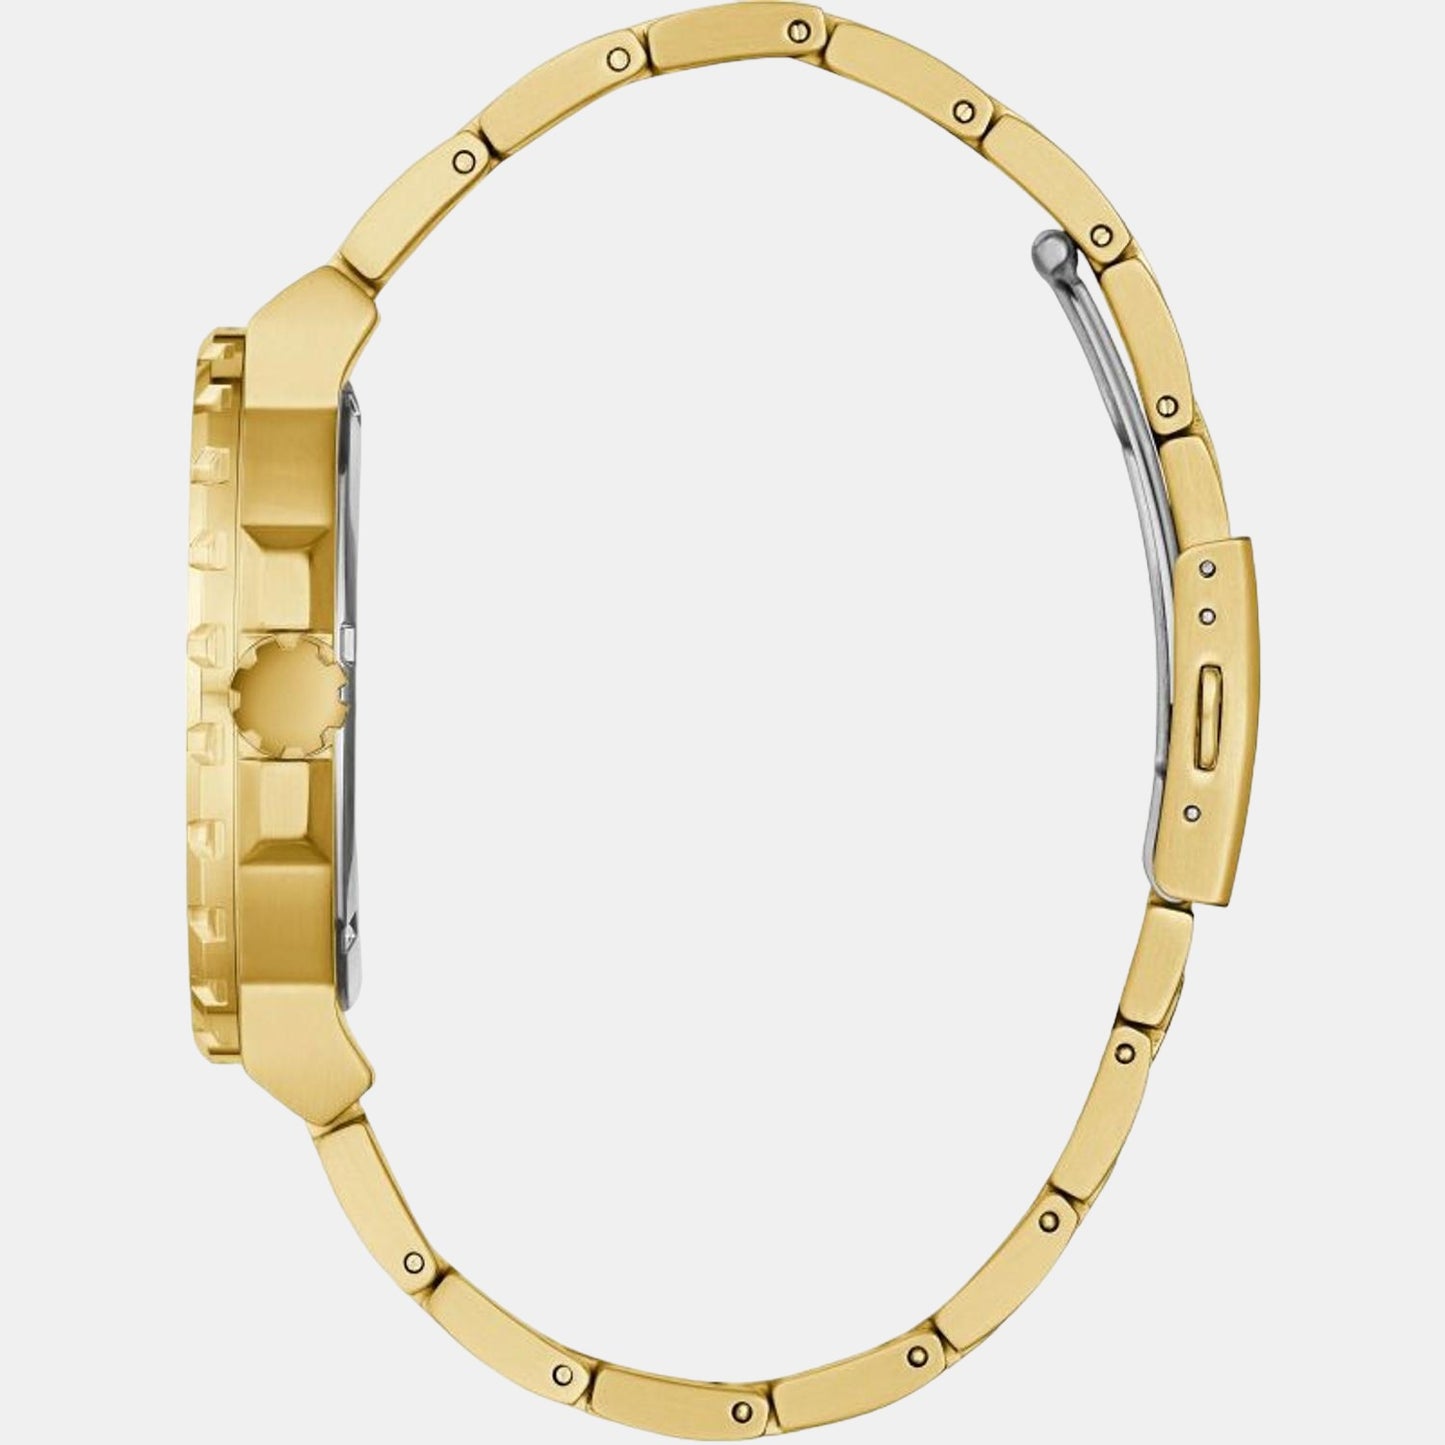 guess-stainless-steel-gold-analog-male-watch-gw0426g2